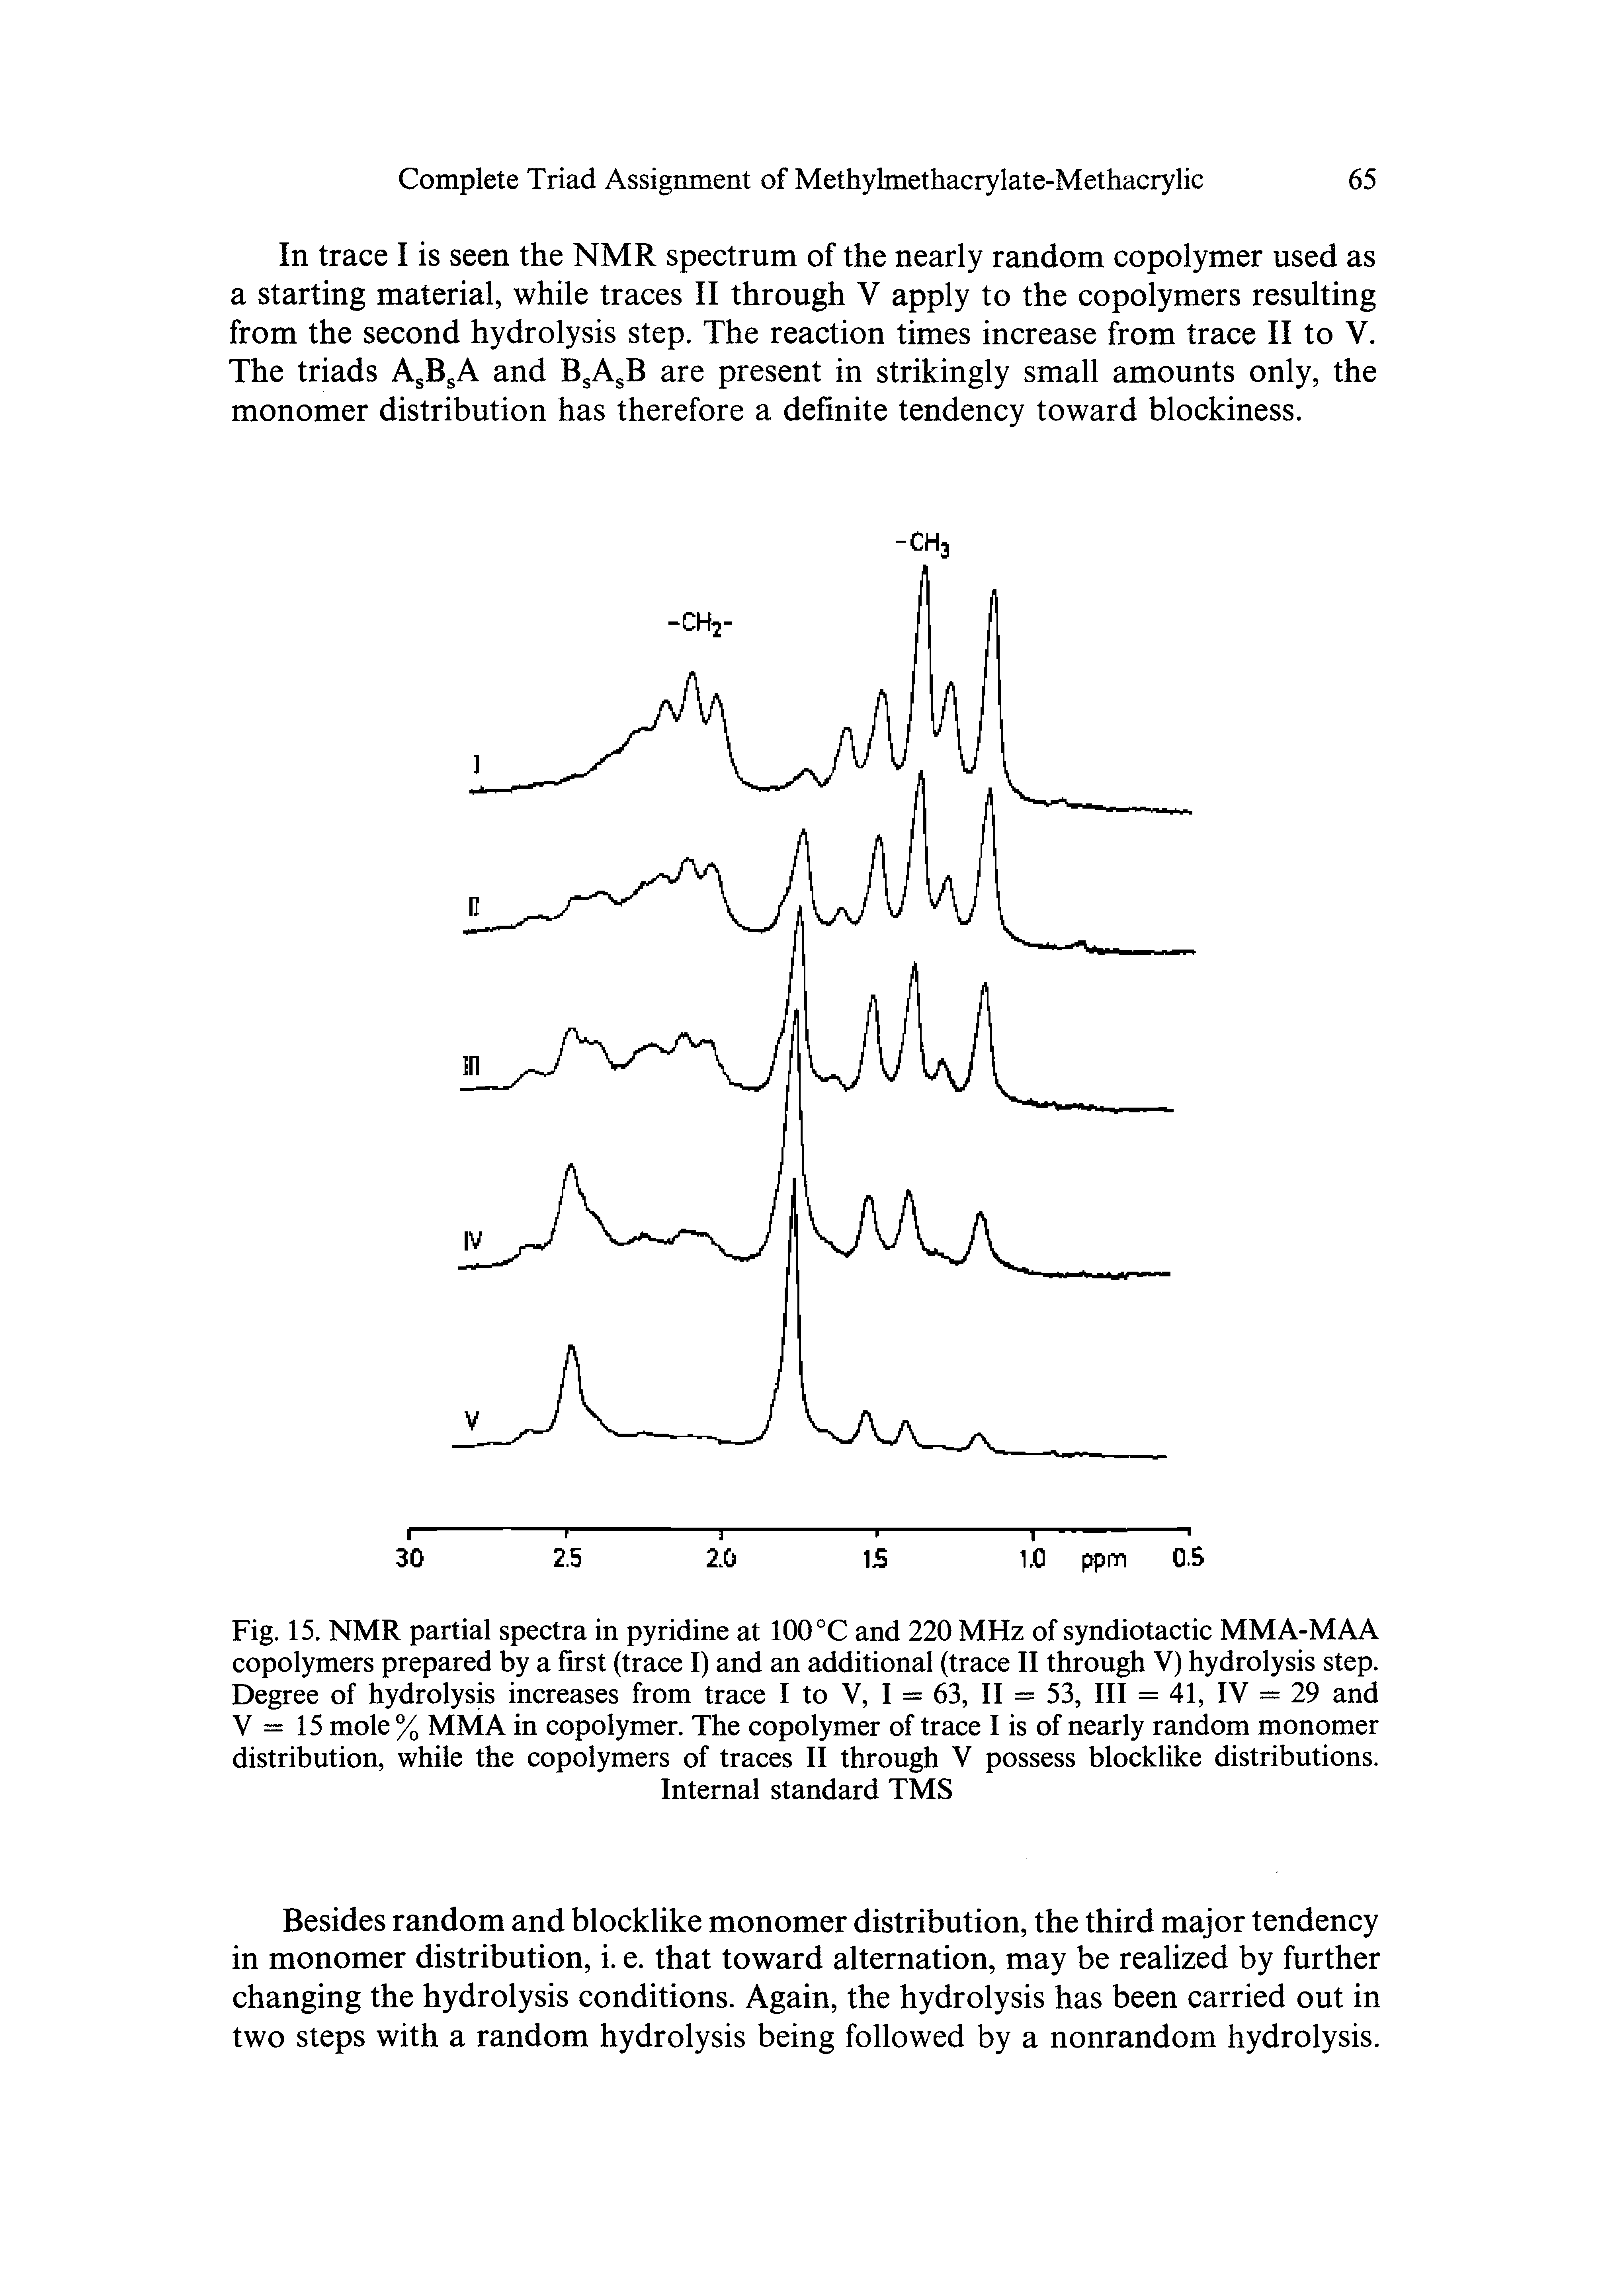 Fig. 15. NMR partial spectra in pyridine at 100 °C and 220 MHz of syndiotactic MMA-MAA copolymers prepared by a first (trace I) and an additional (trace II through V) hydrolysis step. Degree of hydrolysis increases from trace I to V, I = 63, II = 53, III = 41, IV = 29 and V = 15 mole% MM A in copolymer. The copolymer of trace I is of nearly random monomer distribution, while the copolymers of traces II through V possess blocklike distributions.